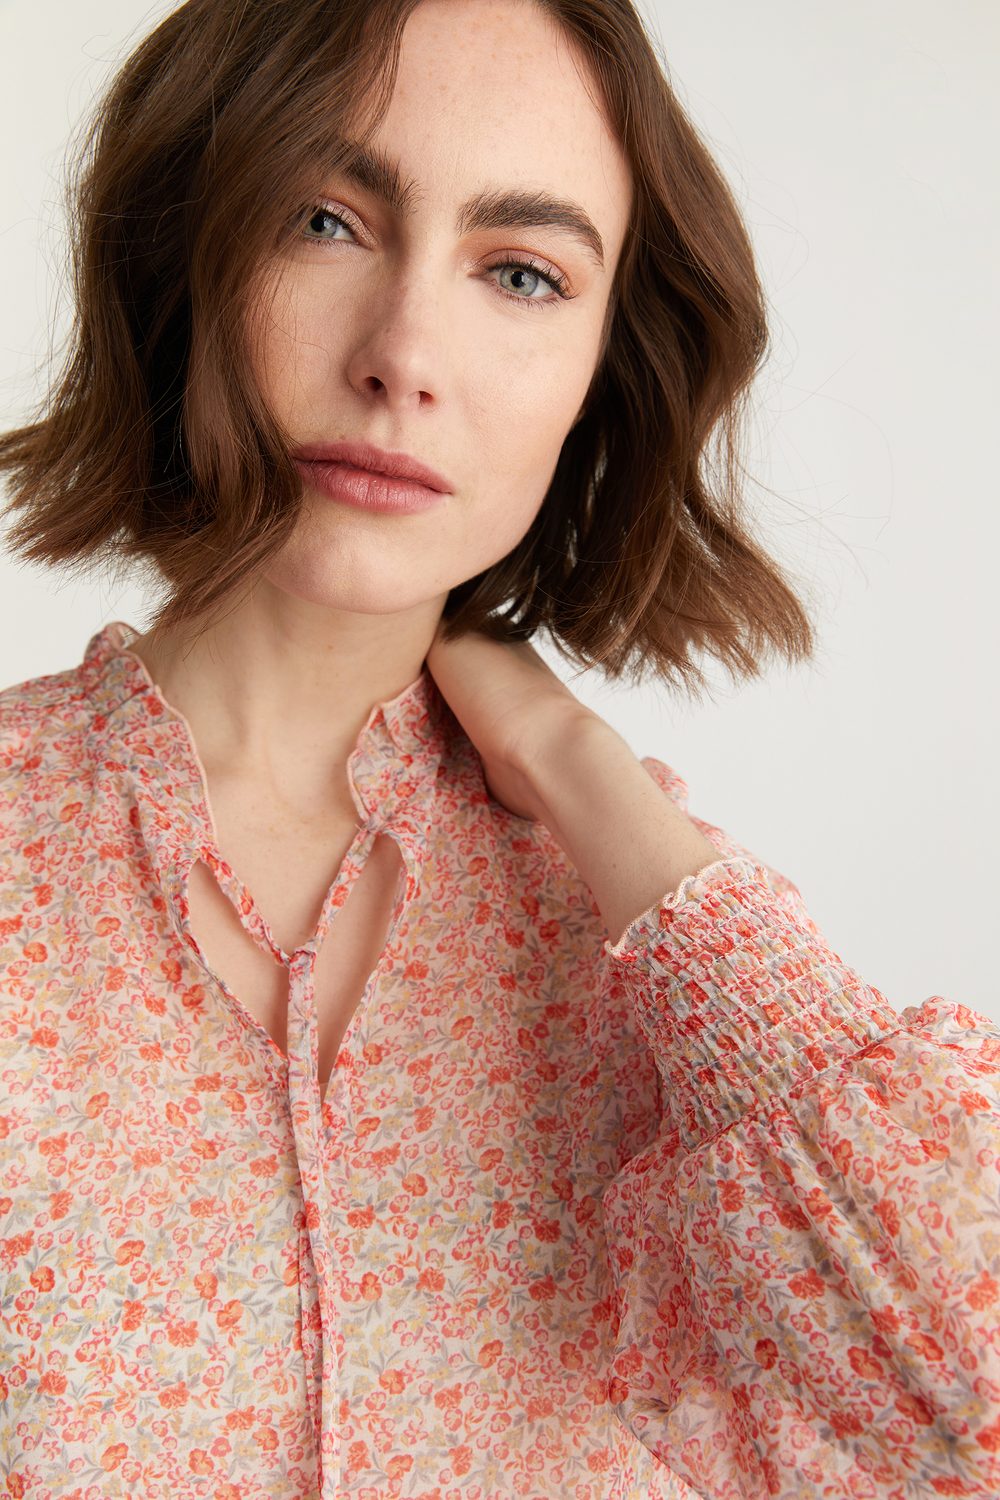 Floral Printed Top With Puffy Sleeves